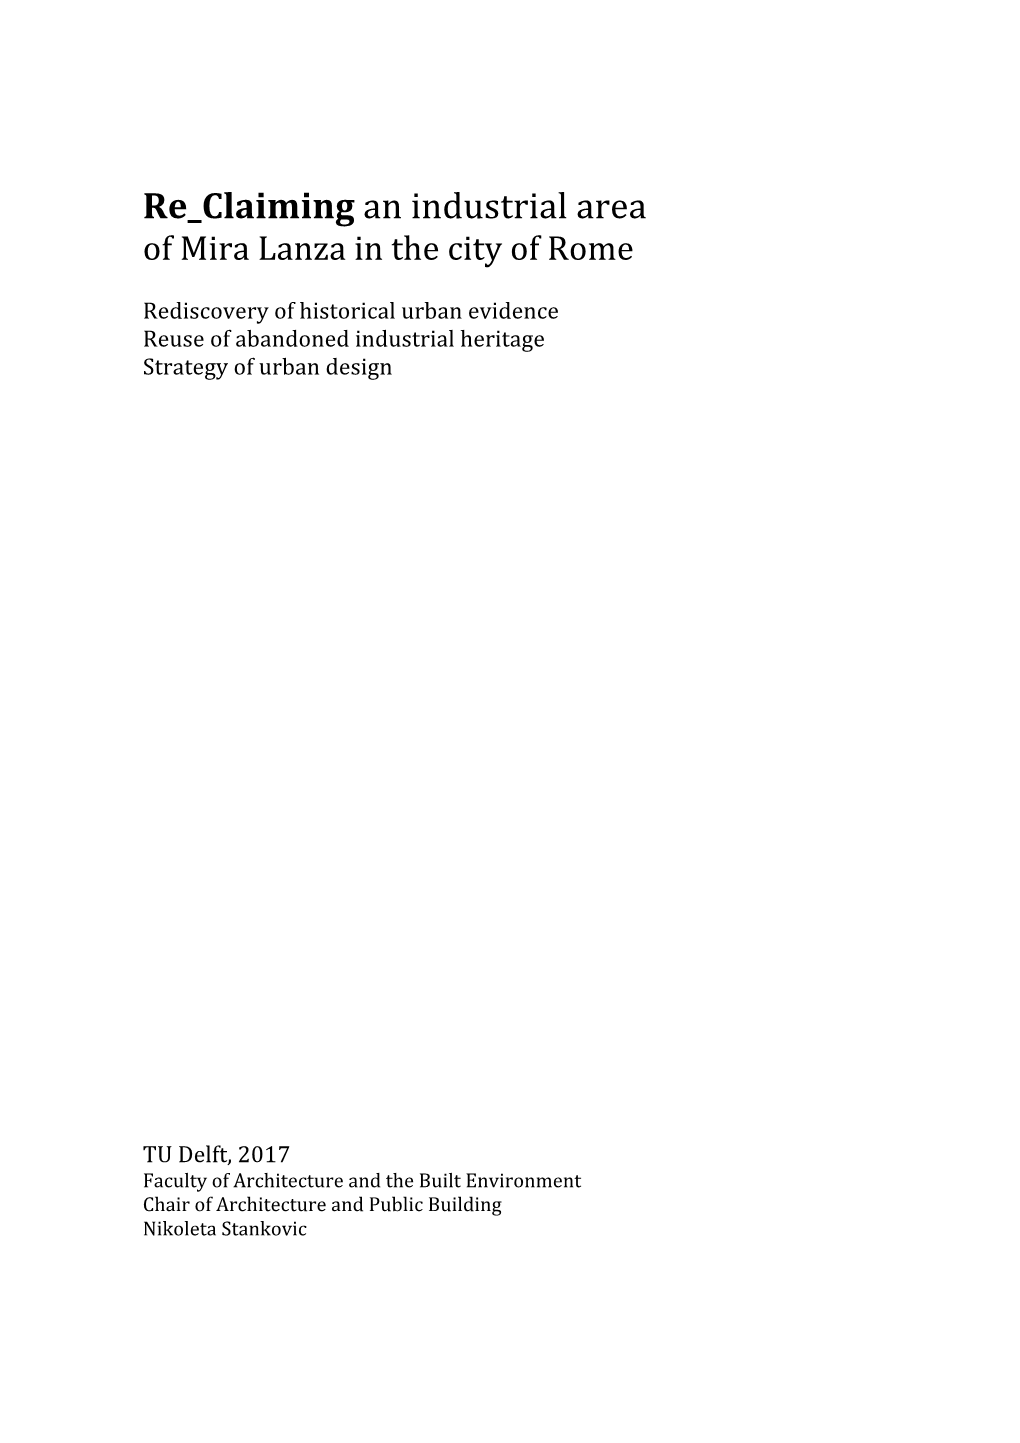 Re Claiming an Industrial Area of Mira Lanza in the City of Rome